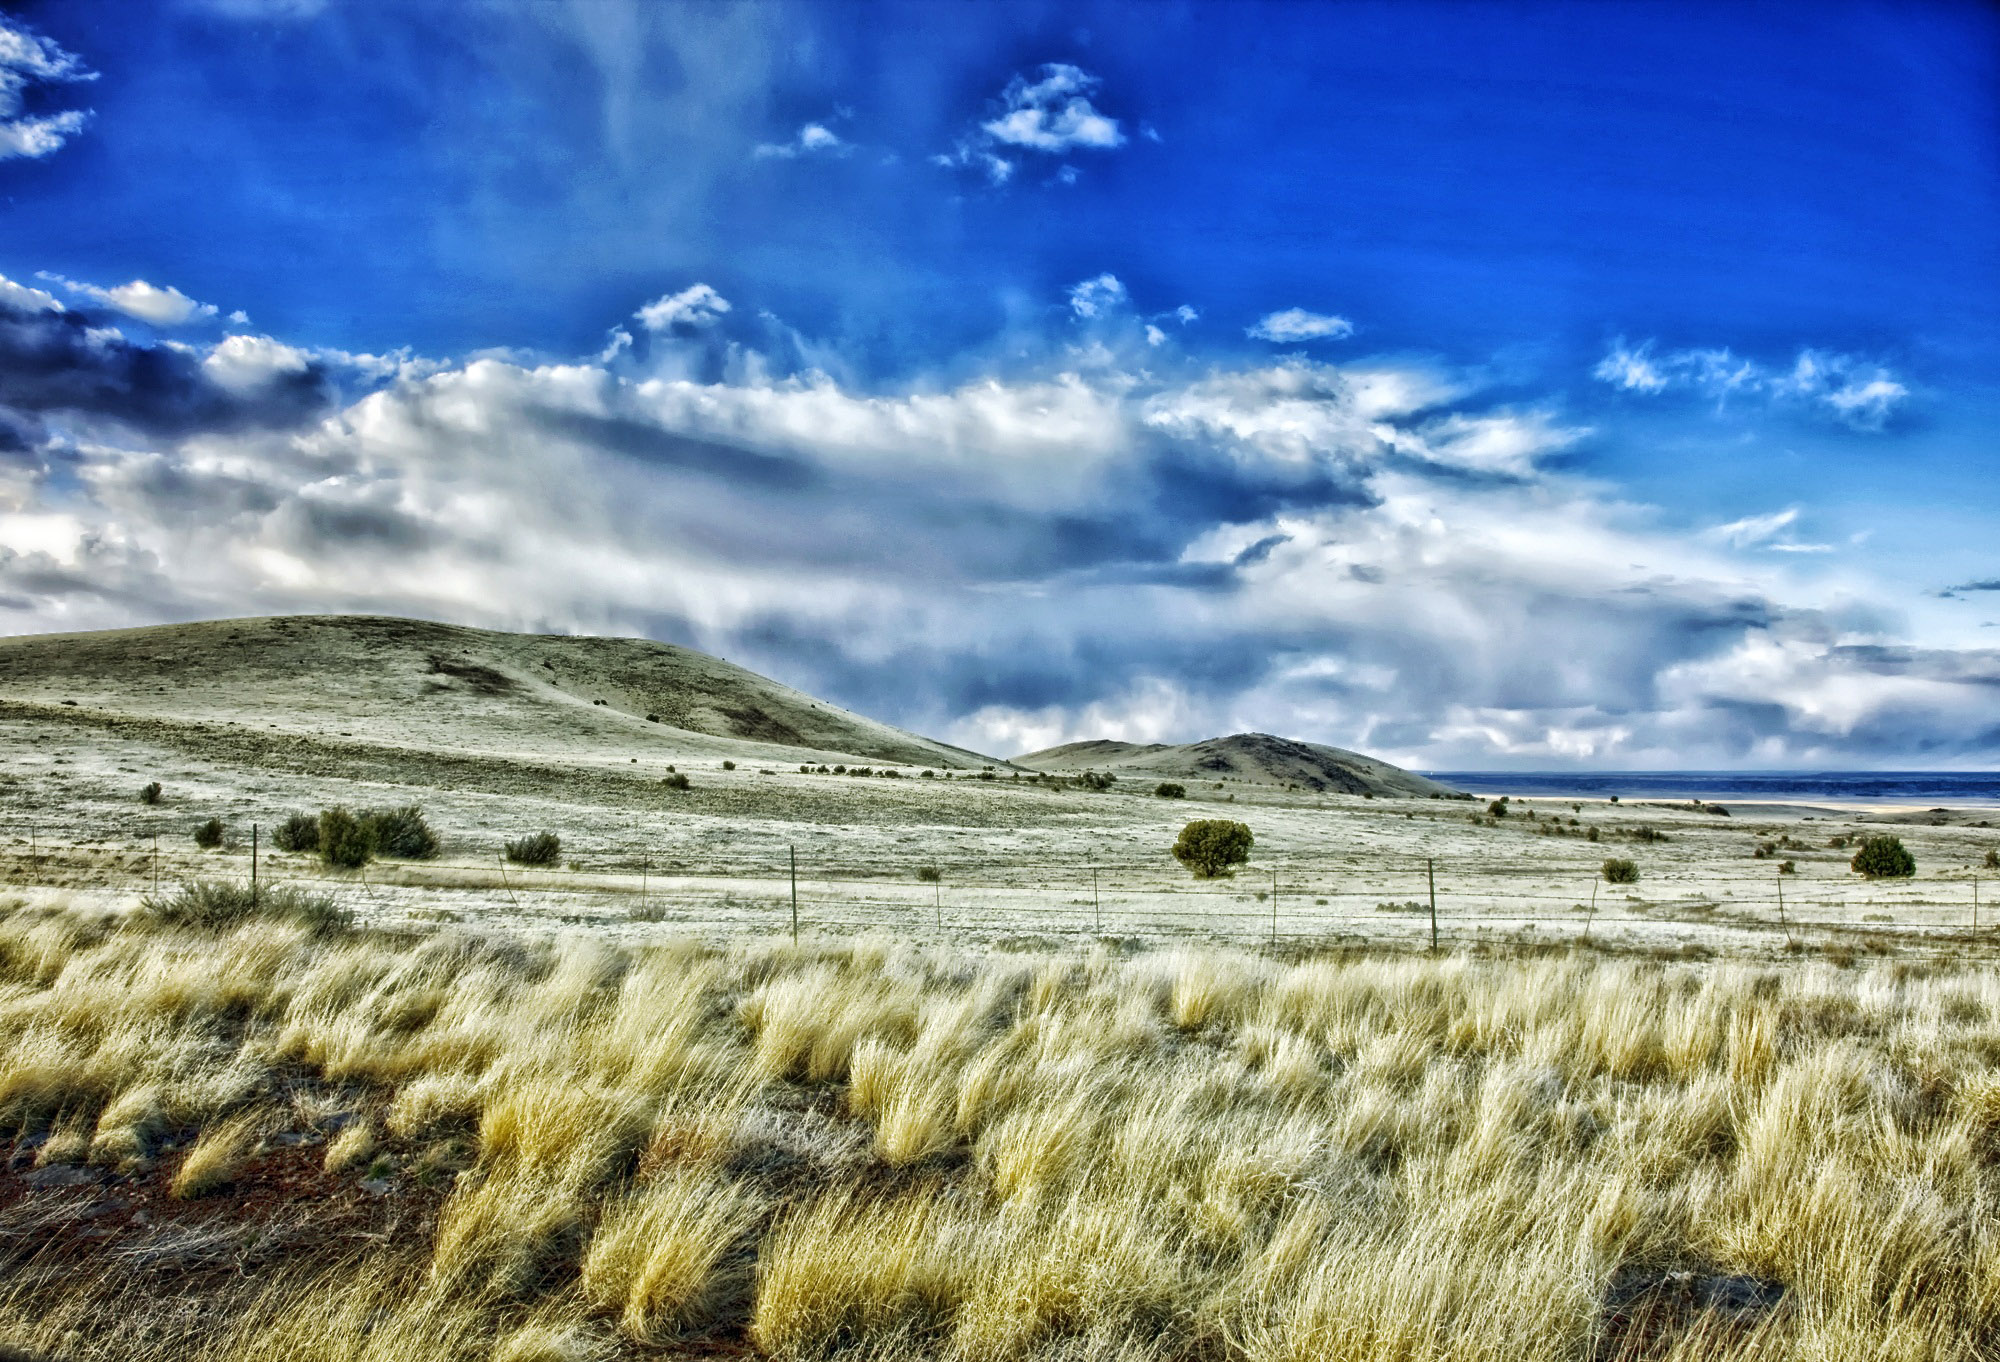 Landscape And Skies In New Mexico Image, New Mexico Landscape Photography